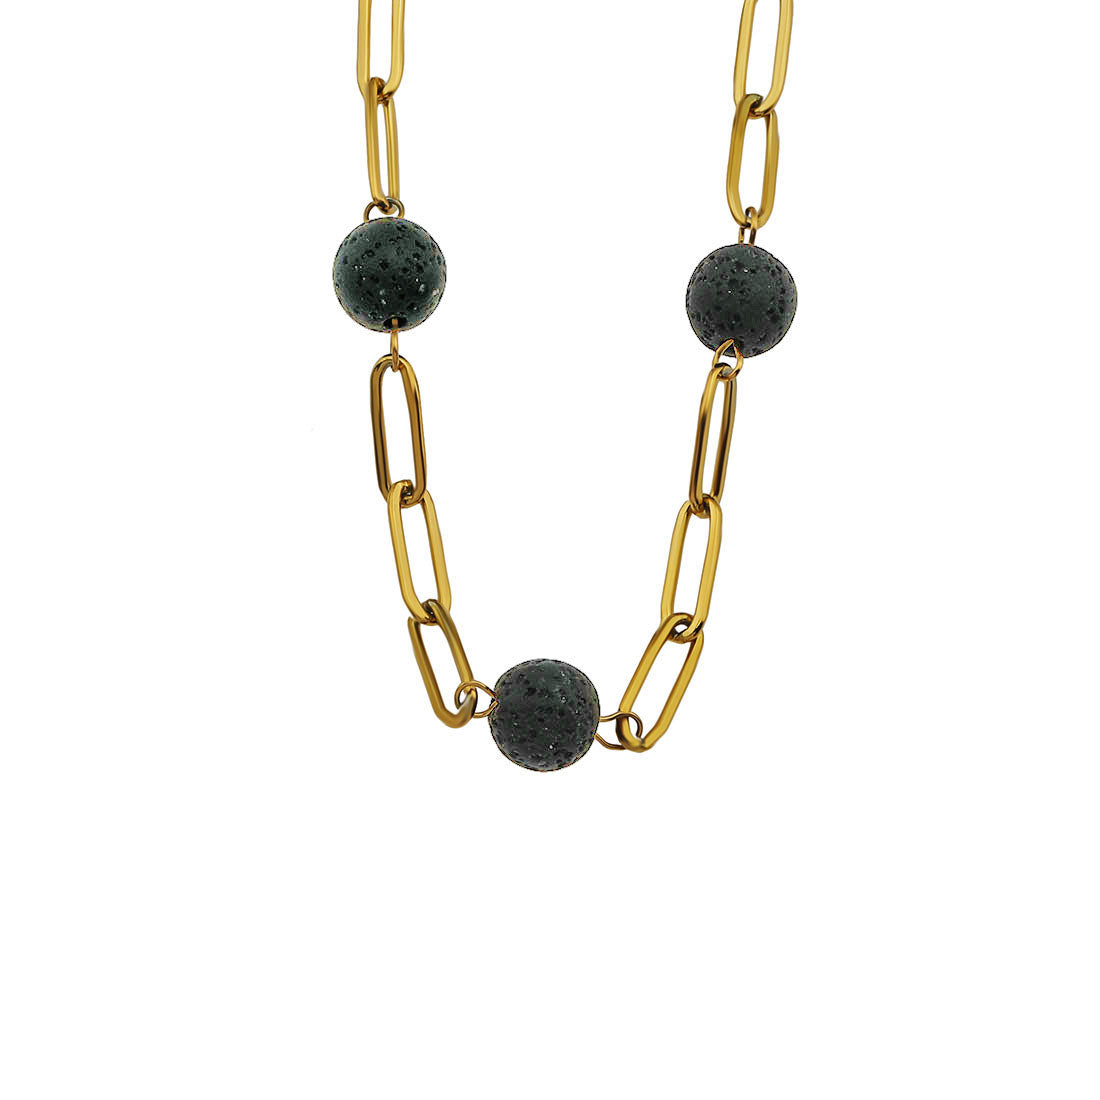 hackney_nine | hackneynine | MYAH212931_necklace | affordable_jewelry | dainty_jewelry | stainless_steel_jewelry | _gold_jewellery | gold_dipped_jewellery | gold-jewellery | lava-stone-jewellery | paperclip_chain | gifts -for-her | gifts-for-mum | gifts-for-mother | gifts-for-females